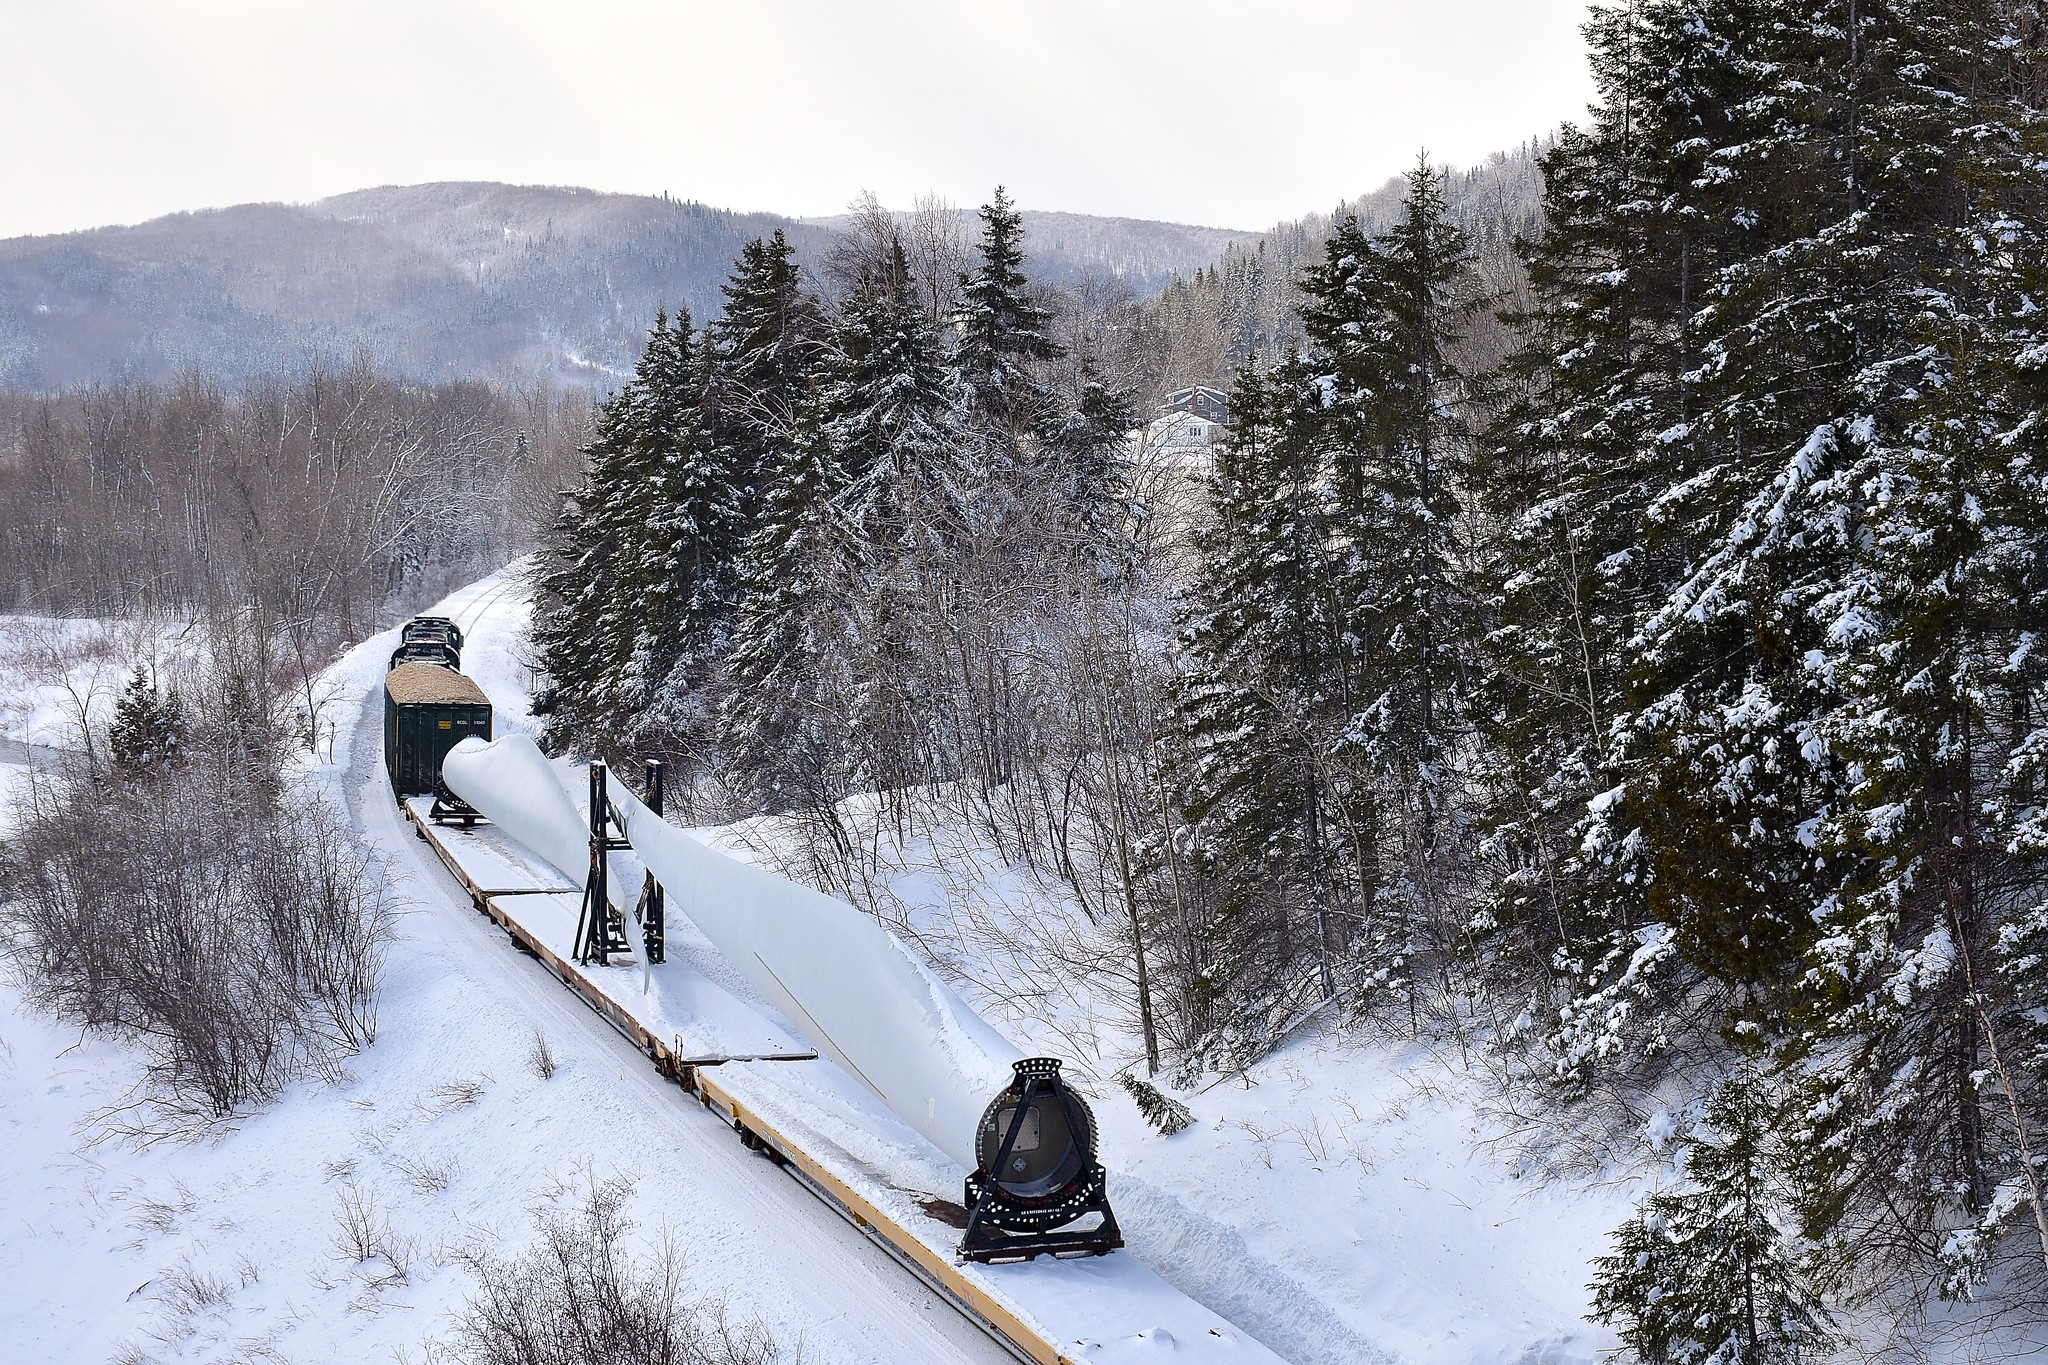 The Société du chemin de fer de la Gaspésie's windmill train is arriving in Matapedia where interchange with the CN will take place as it passes under a bridge where all the railfans chasing this train assembed for a final action shot.